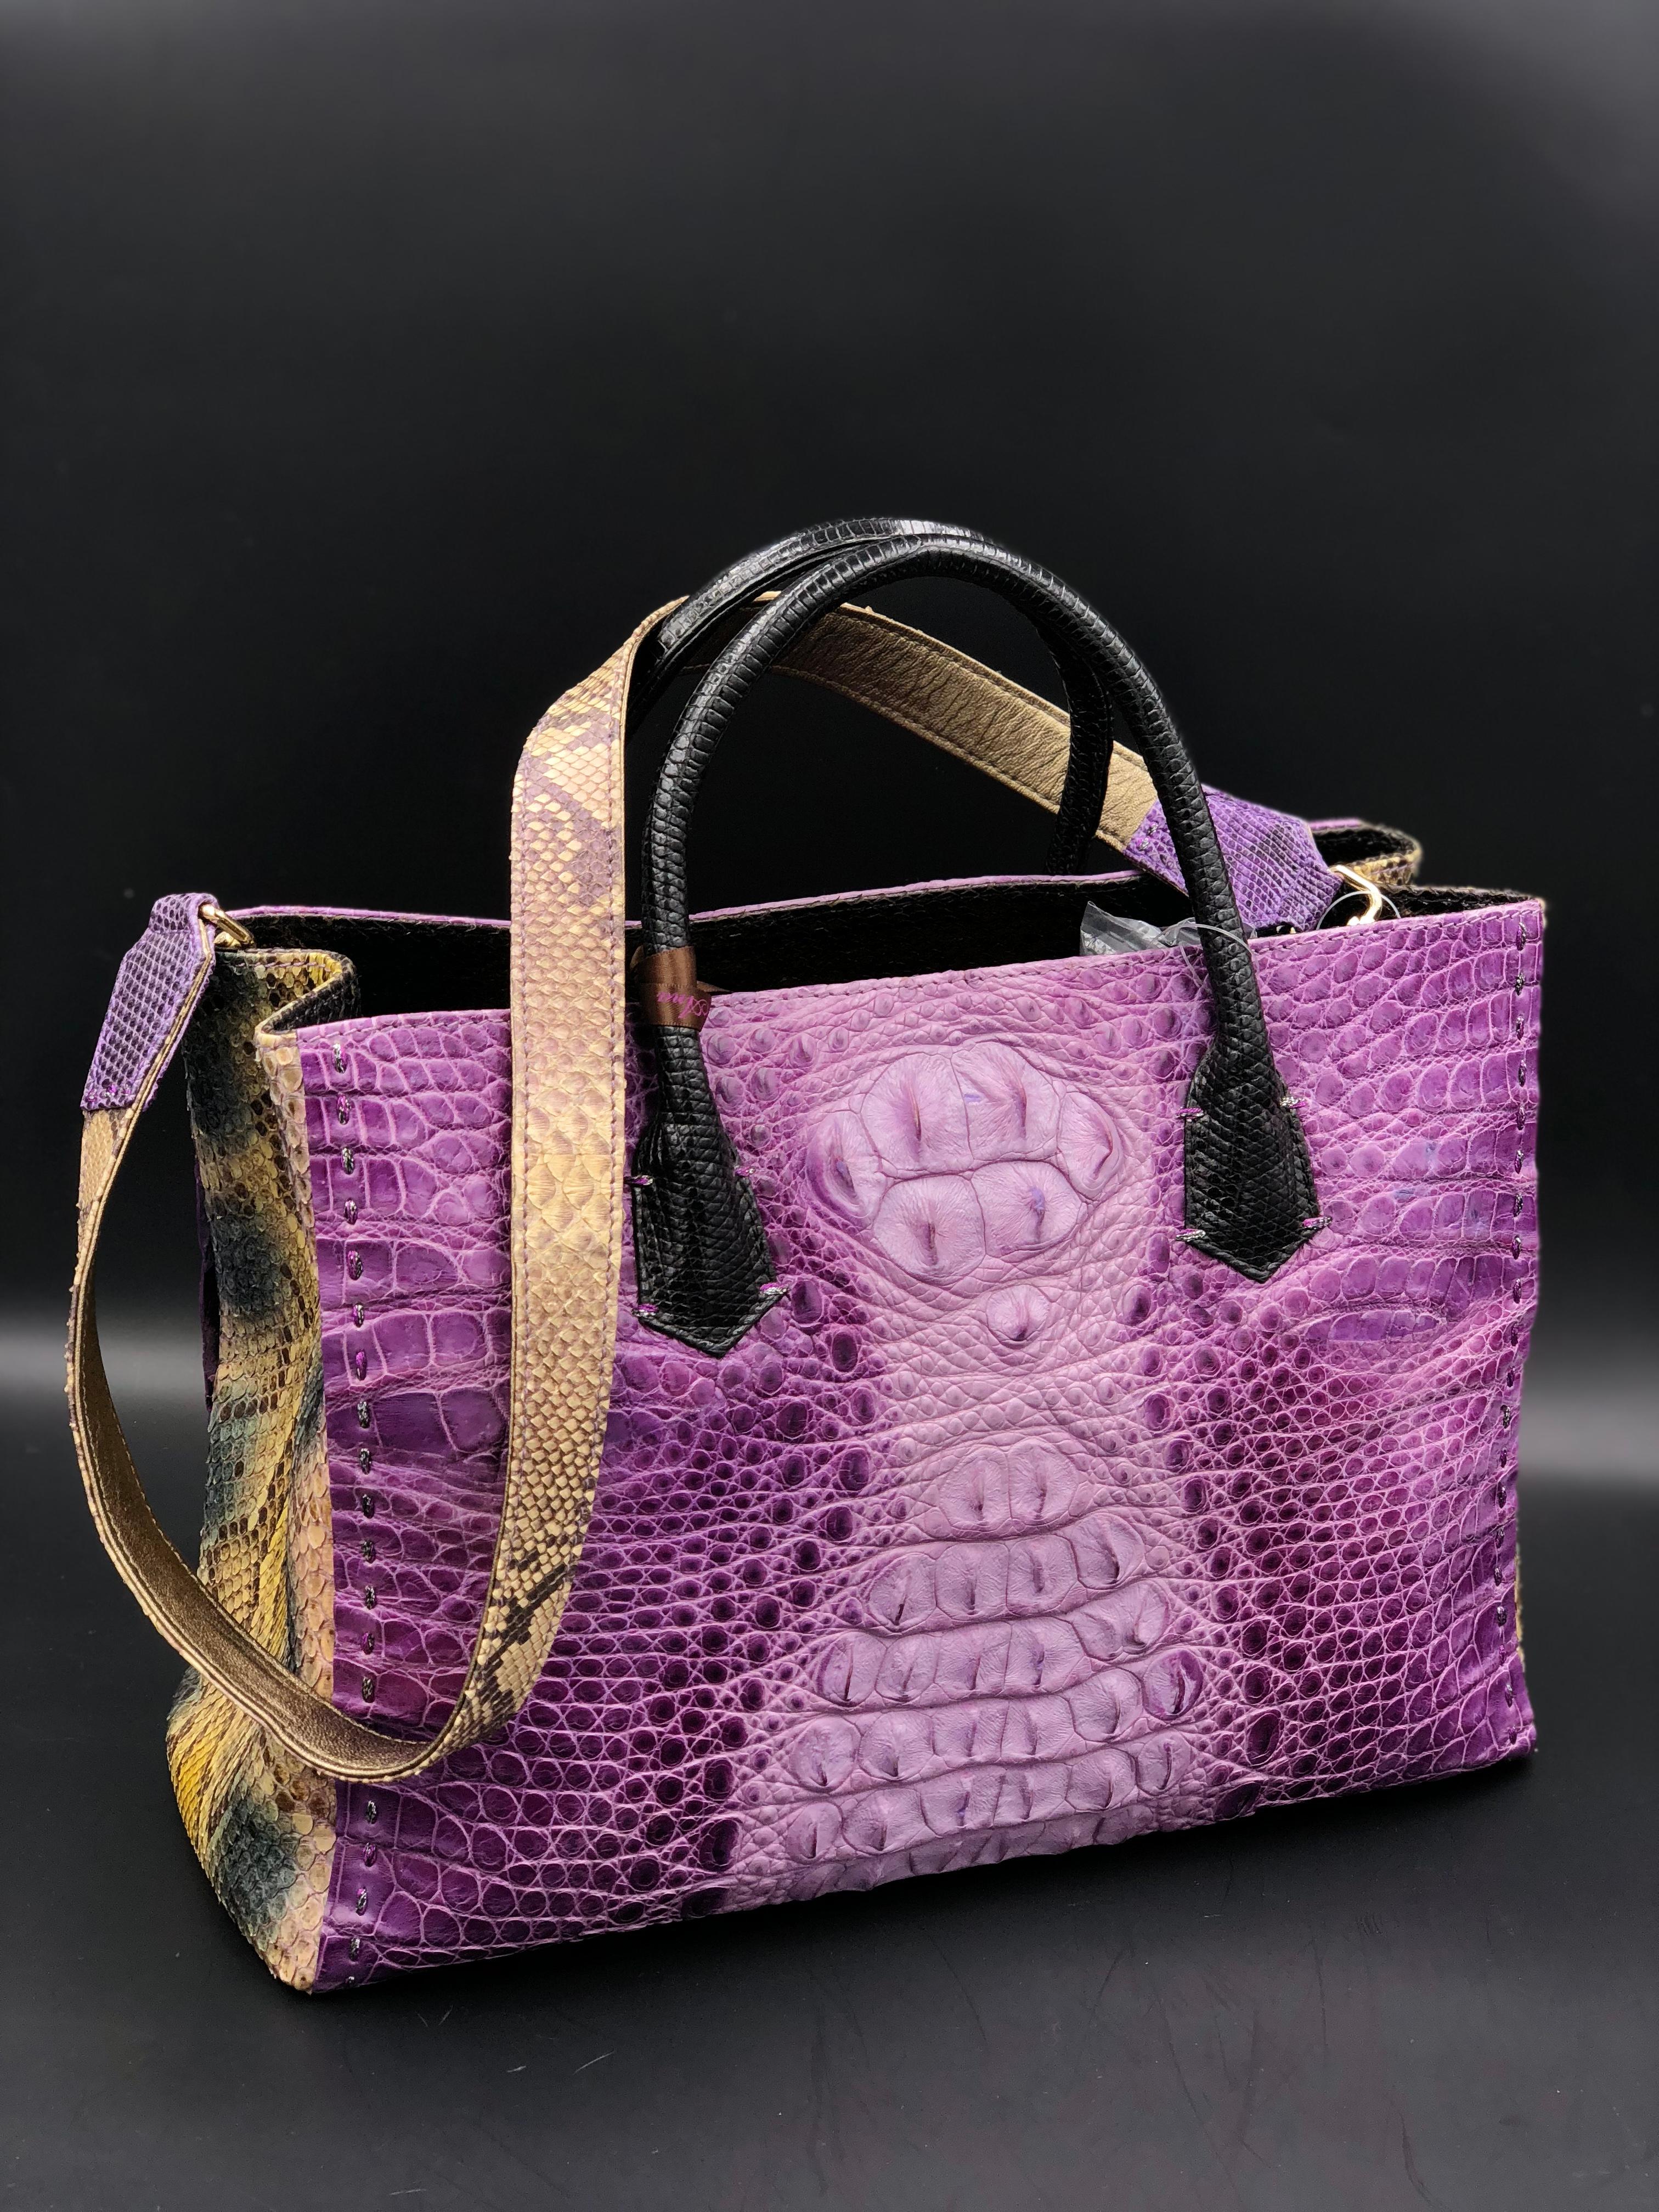 Ana Switzerland Crocodile Handbags all exquisite original design crafted by hand and made with finest skins. Each bag with colorful suede lining and with Swarovski crystals. Can order in different colors: Black, Green, Pink, Yellow, Red, White